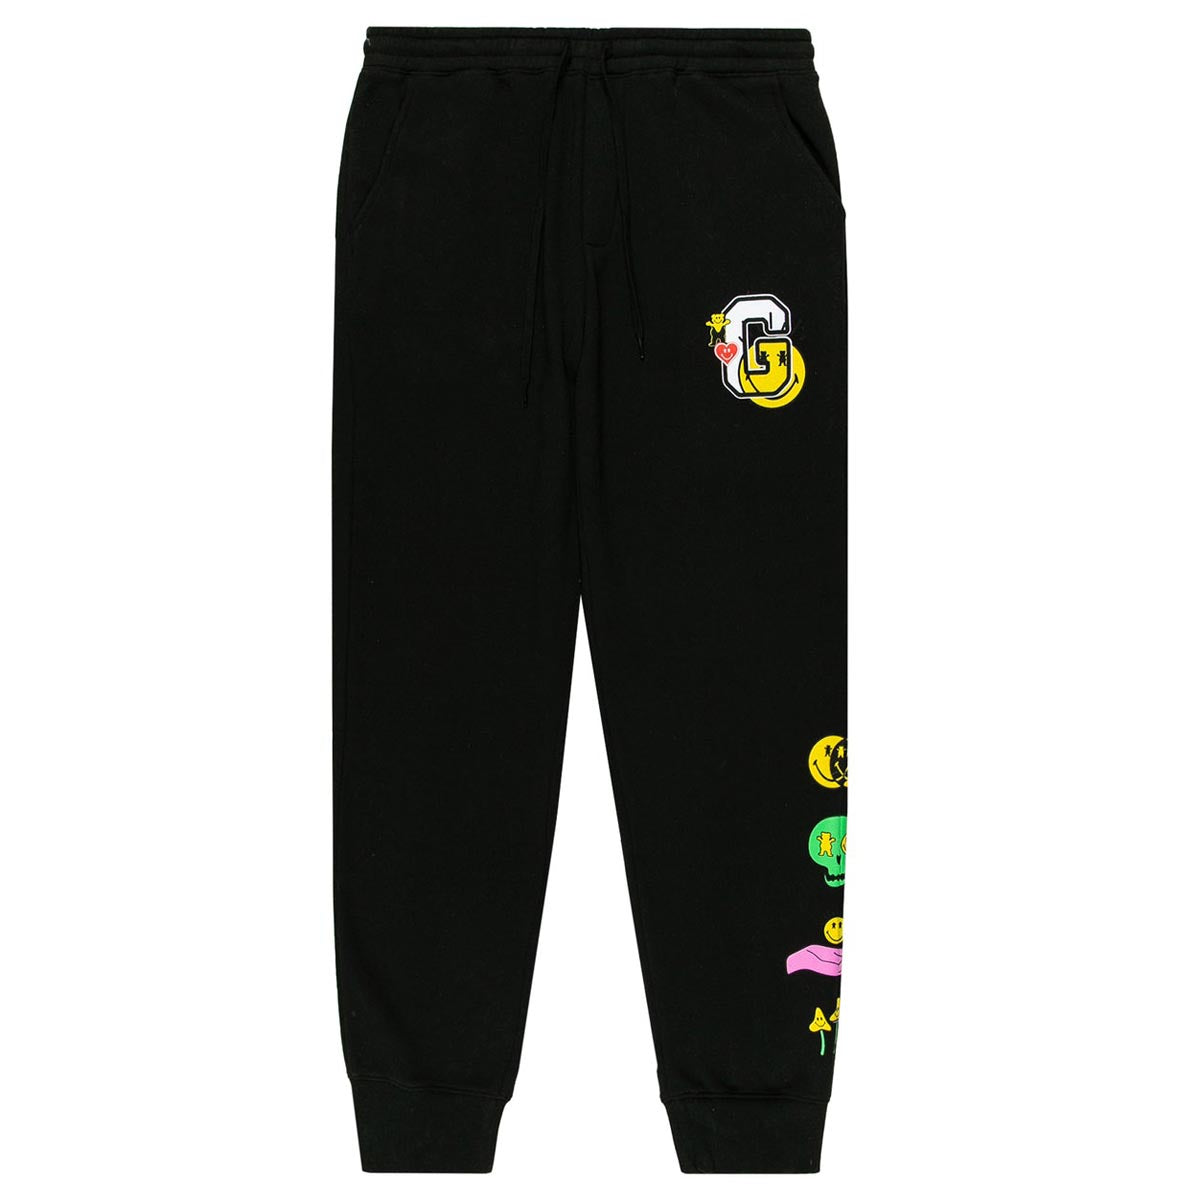 Grizzly x Smiley World Sweat Pants - Black image 1